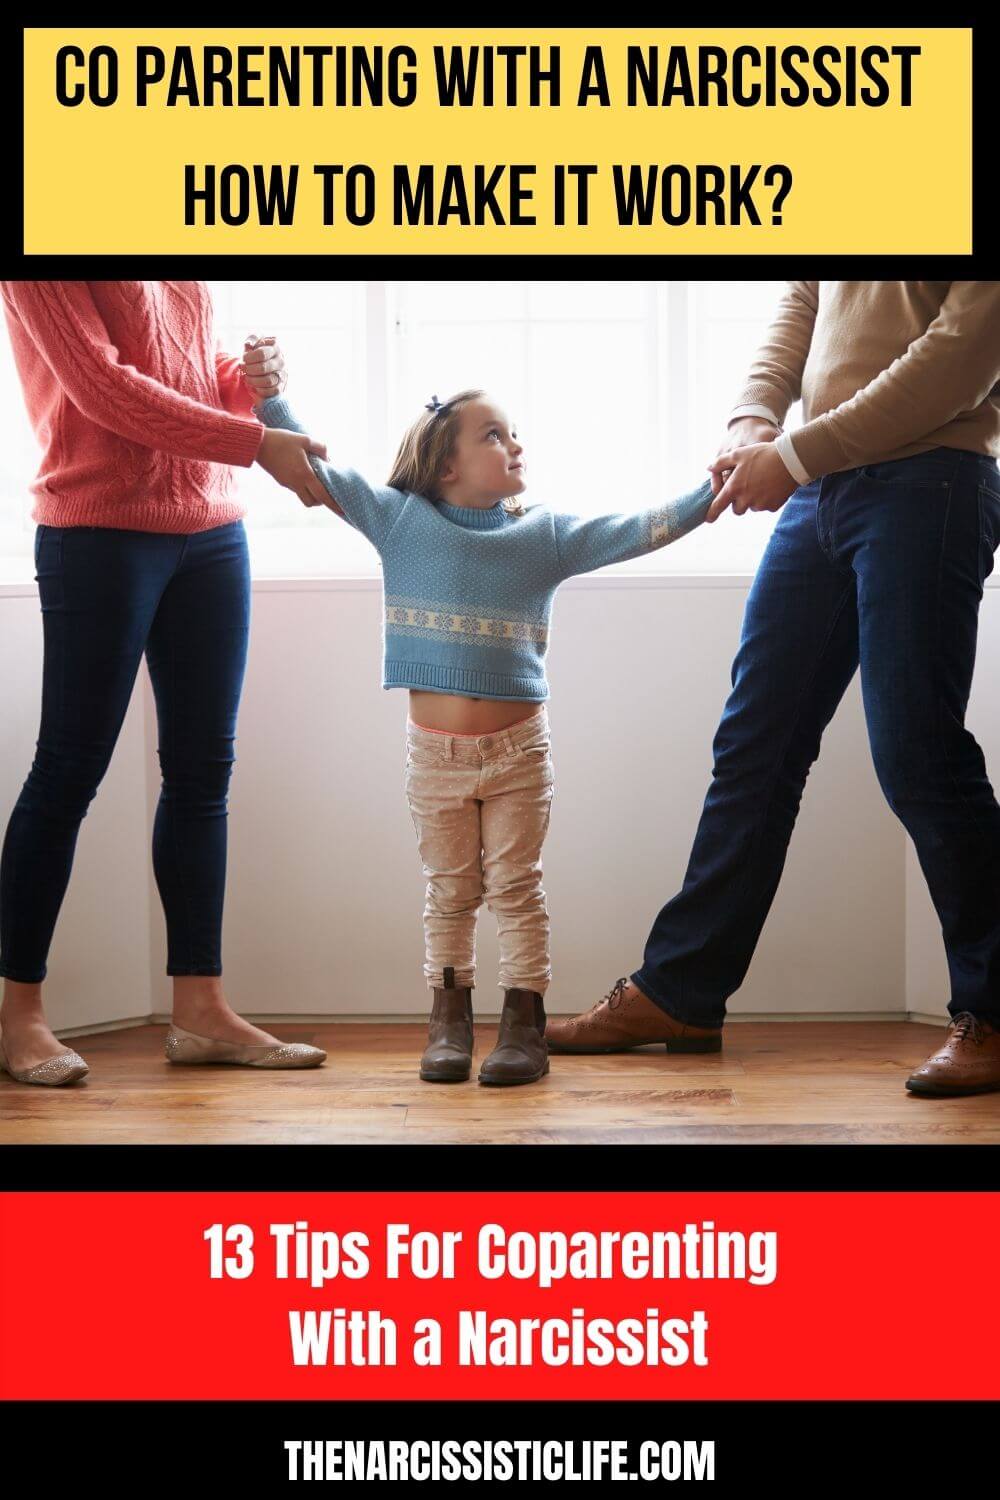 13 Helpful Tips for CoParenting With a Narcissist The